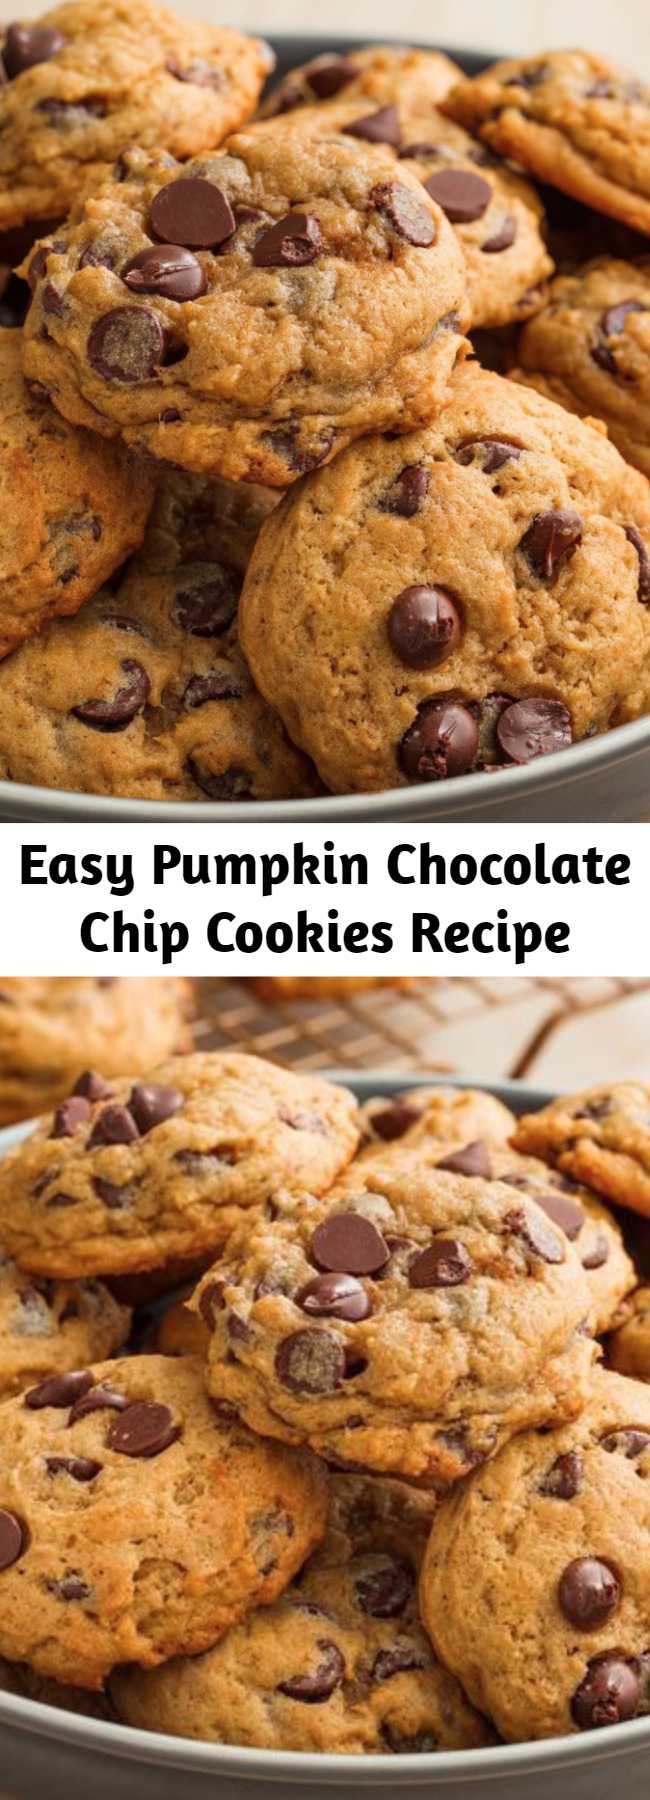 Easy Pumpkin Chocolate Chip Cookies Recipe - This is one of our most popular fall desserts, and it's not hard to see why. Adding pumpkin puree and pumpkin spice to the cookie dough results in a heavenly pillow-like cookie with major autumn vibes.